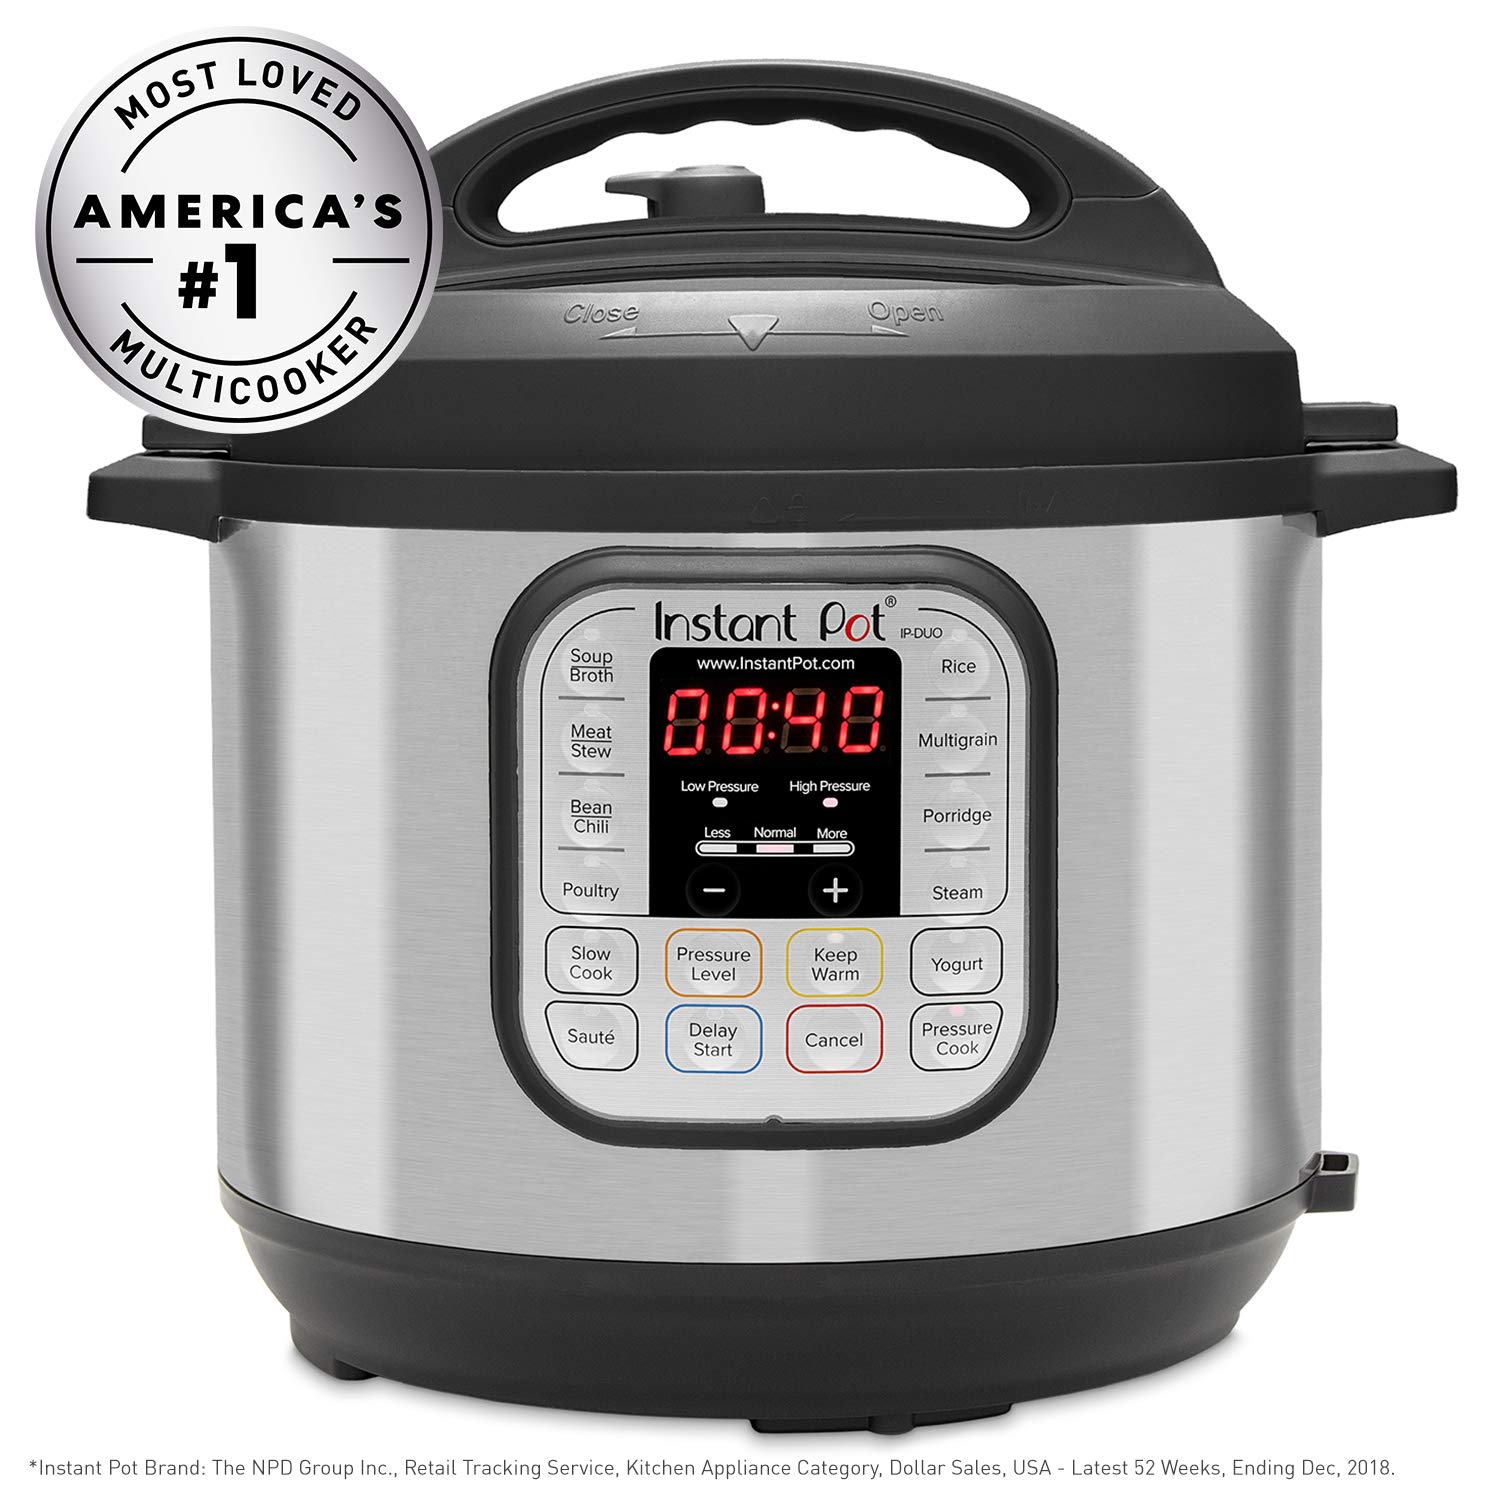 Advanced Programmable Pressure Cookers with Induction Heating System  Available on